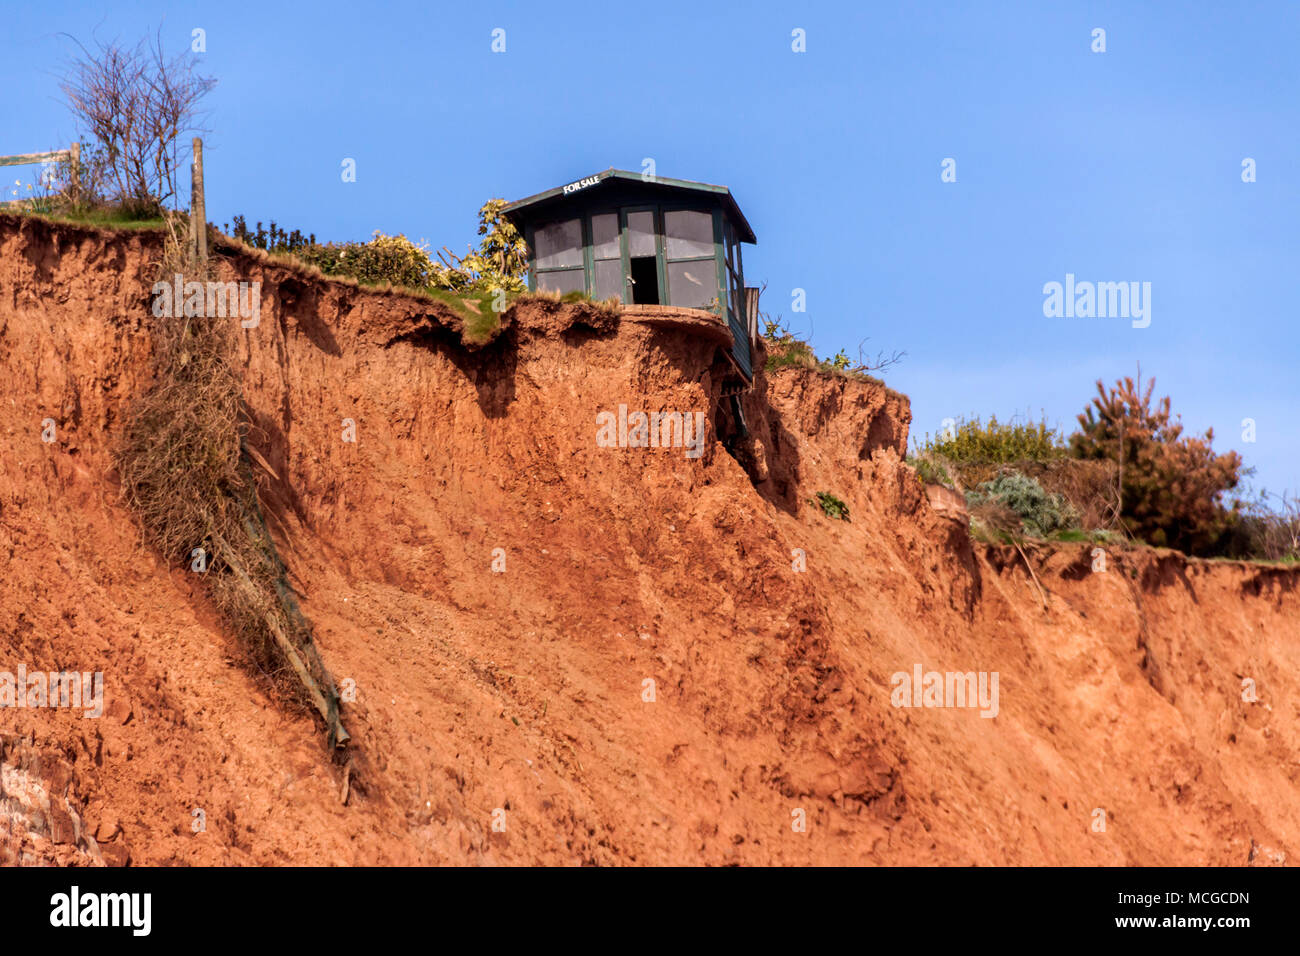 Sidmouth, Devon. 16th Apr 2018. UK Weather: Another rockfall - but still the 'Sidmouth Shed' hangs onto it's precarious perch. The whole town waits in anticipation.... Stock Photo